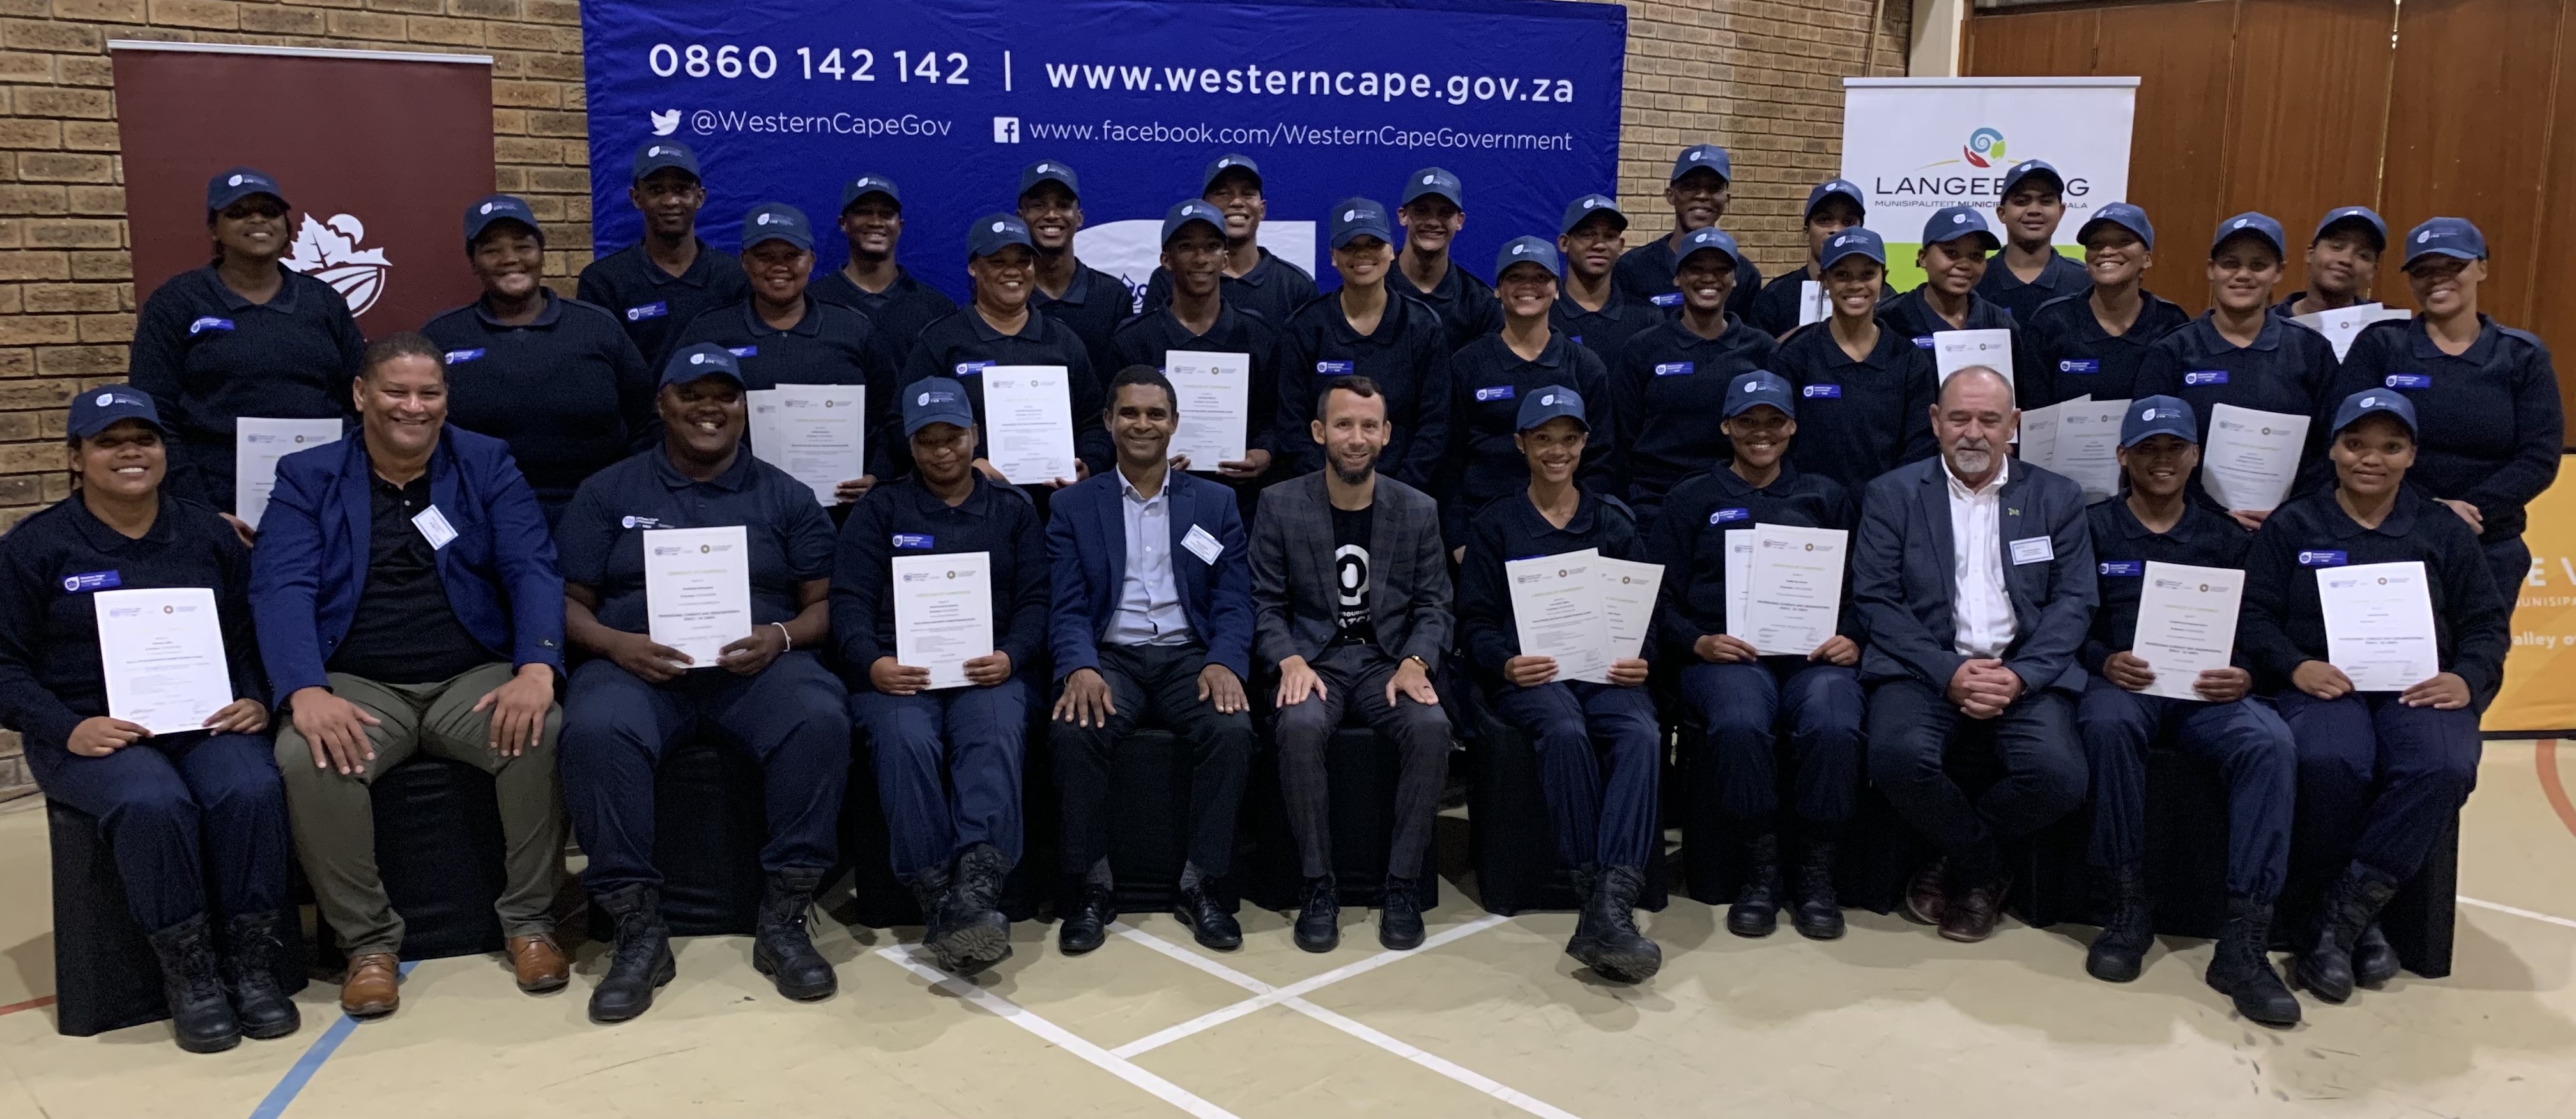 L – R: Breede Valley Deputy Mayor, Councillor Juben von Willing, Acting Head of the Western Cape Department of Police Oversight and Community Safety, Hilton Arendse, Western Cape Minister of Police Oversight and Community Safety, Reagen Allen and Langeber